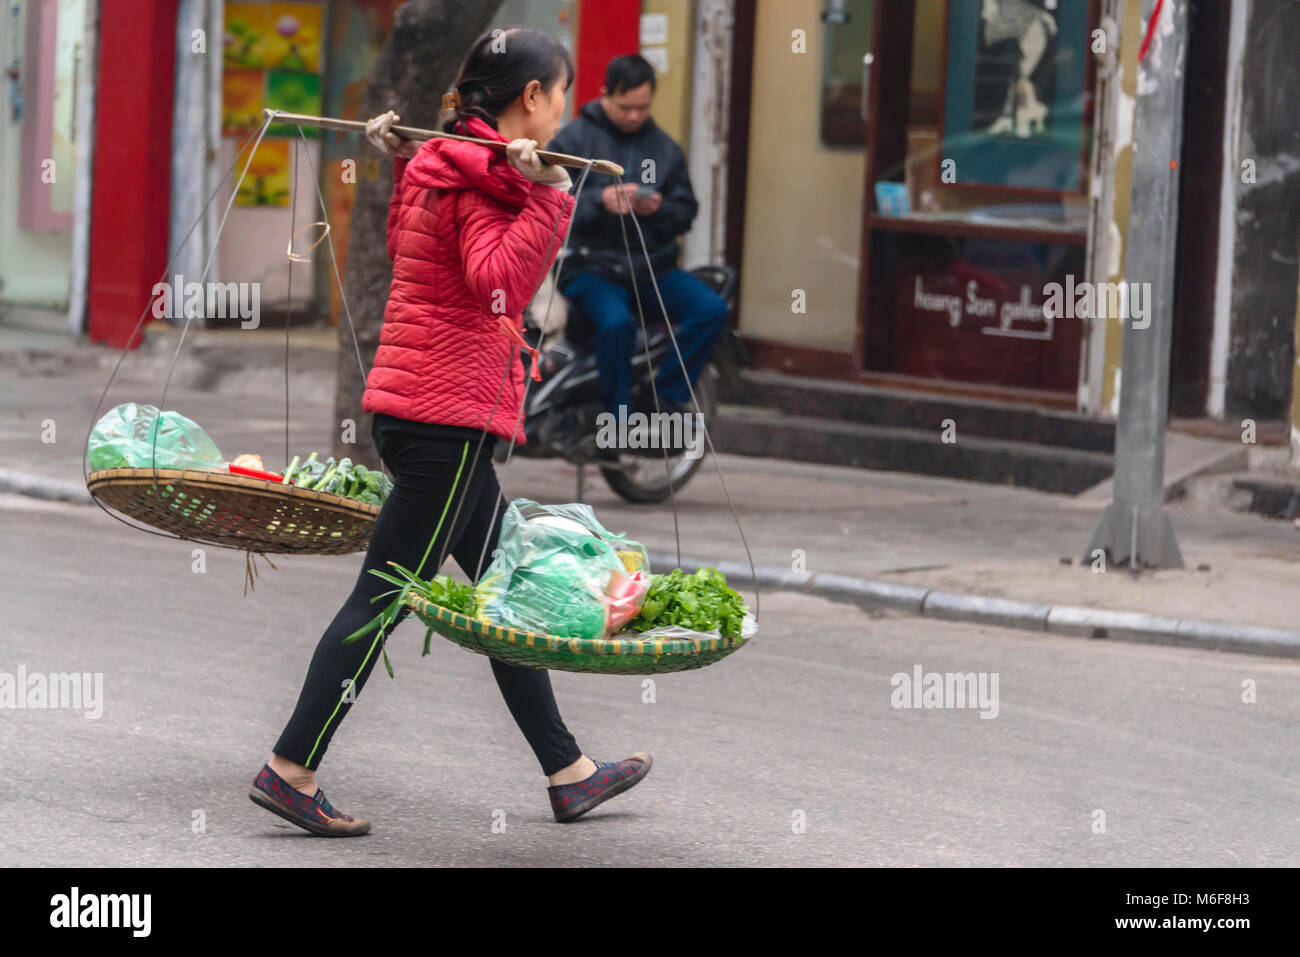 A woman carries vegetables in baskets slung from her bamboo carrying pole in Hanoi, Vietnam Stock Photo